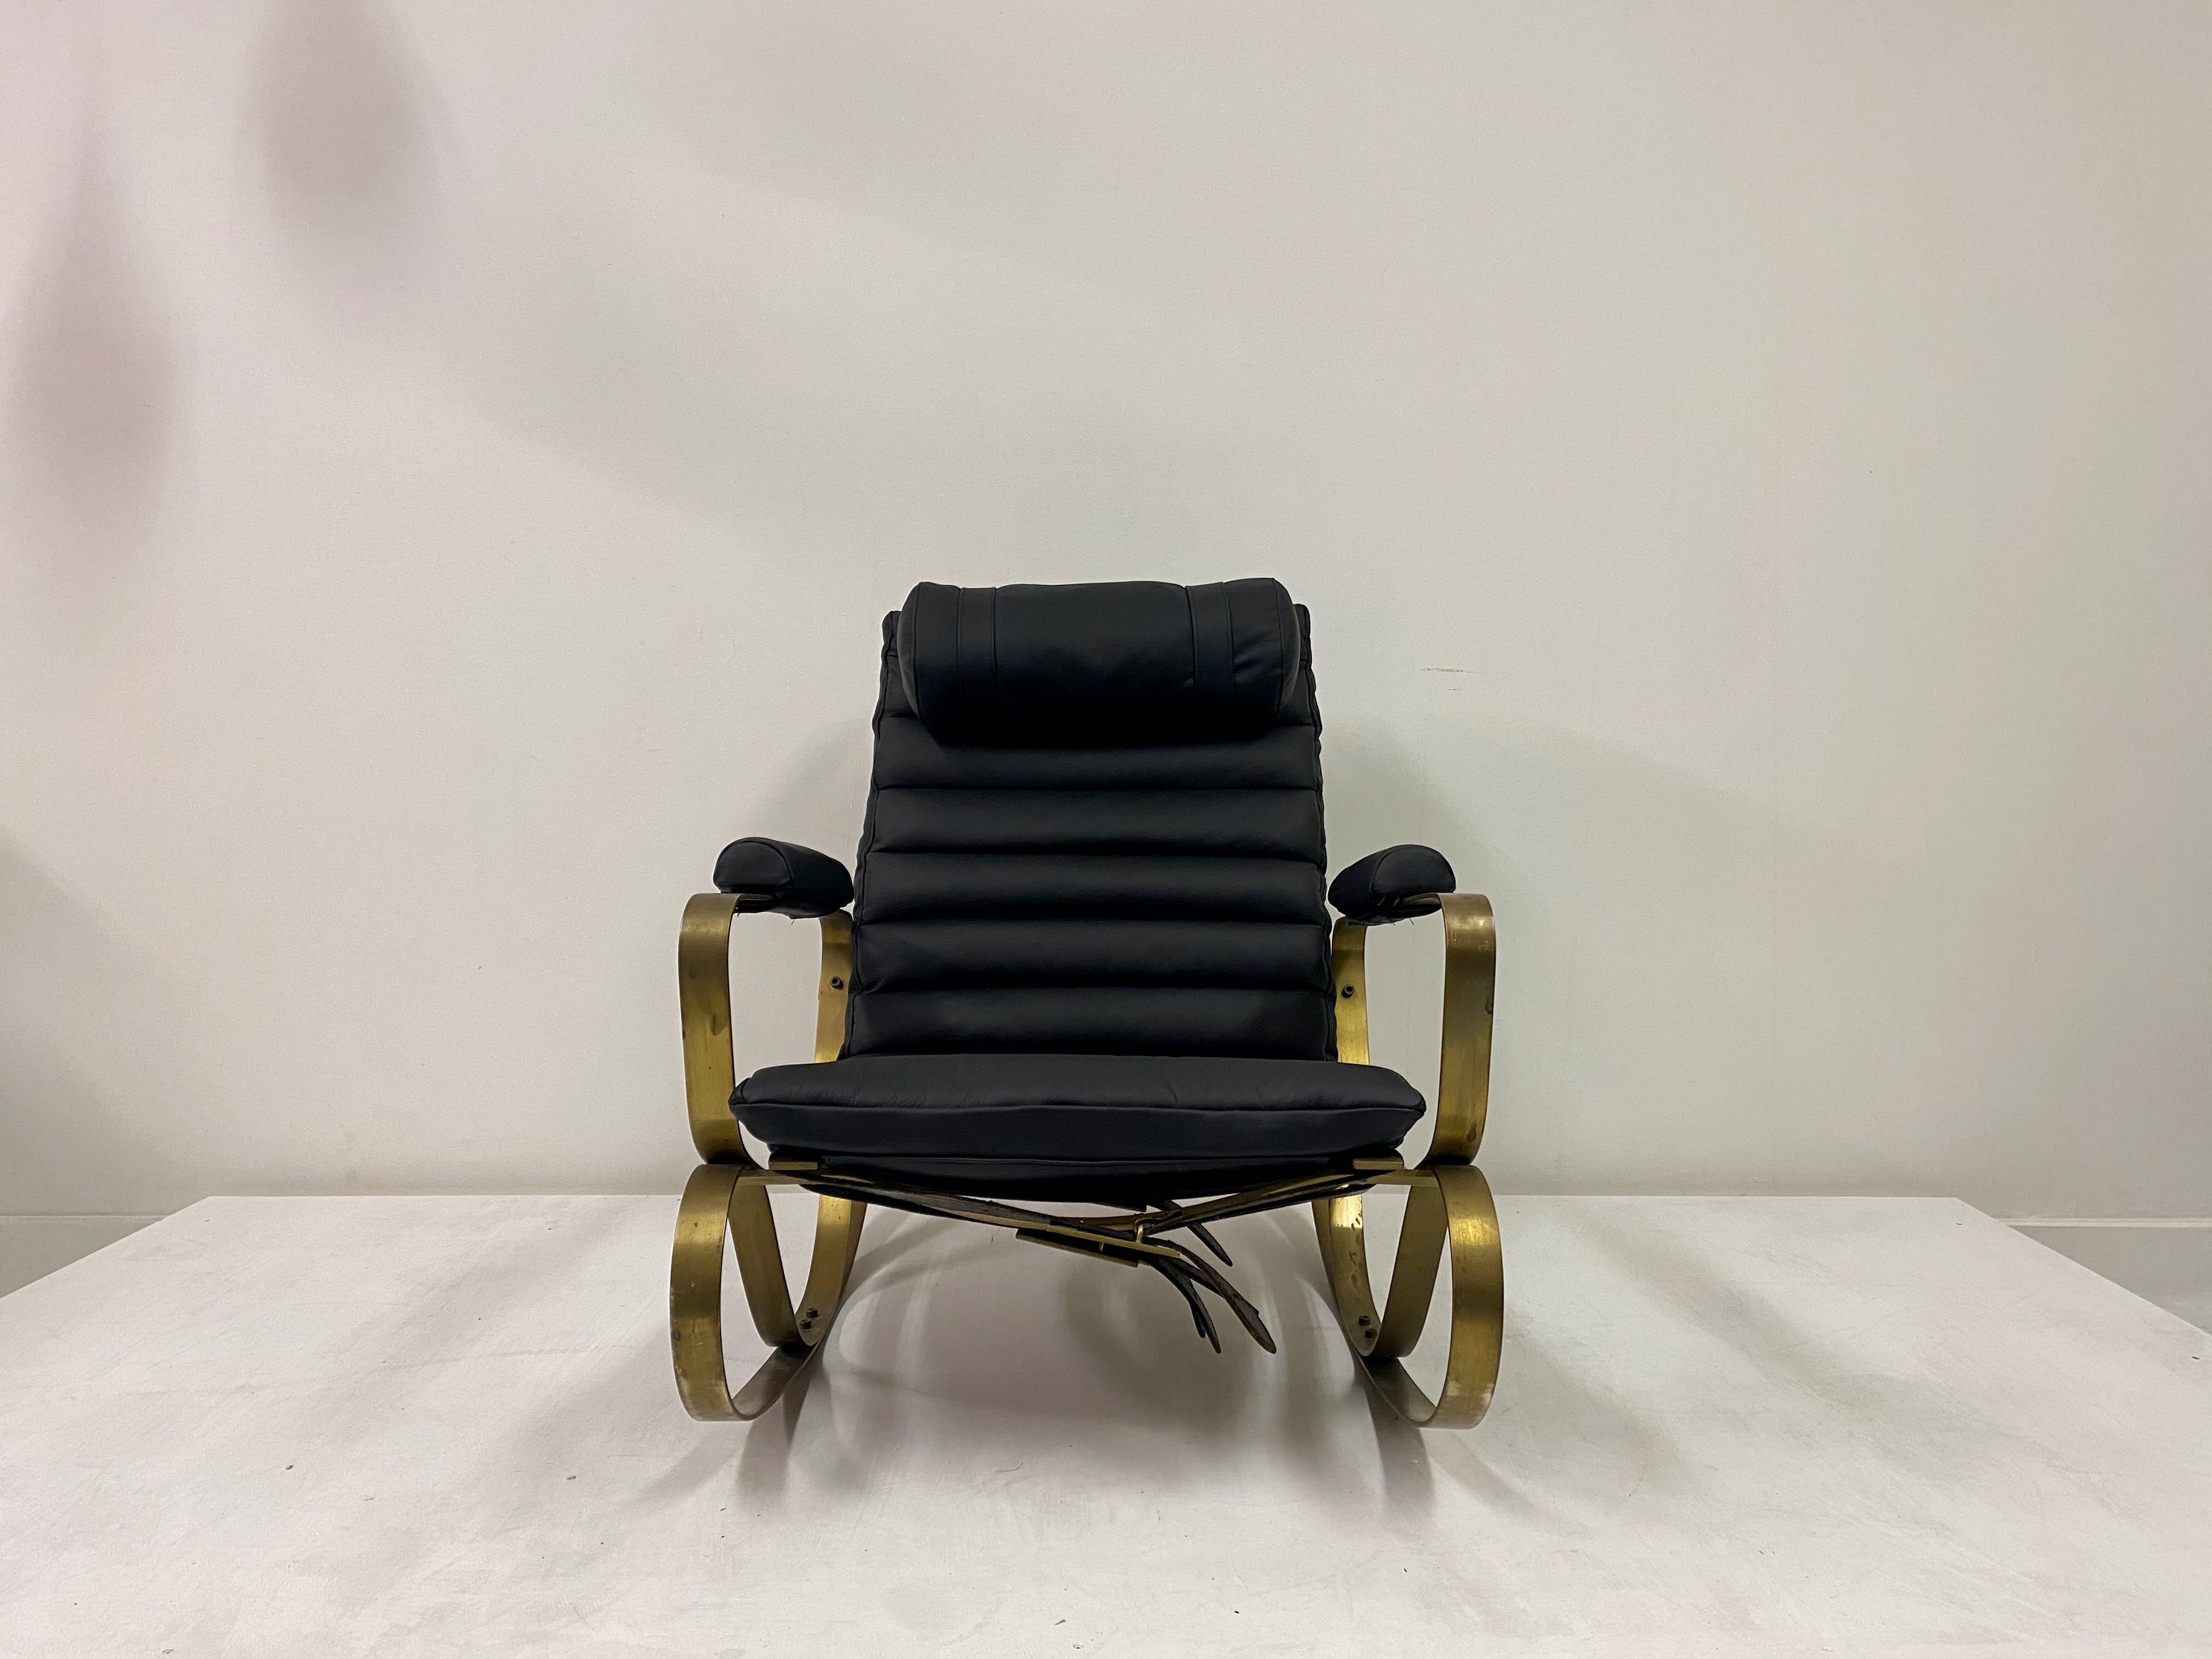 Rocking chair

By Luciano Frigerio

Solid brass or bronze

New black leather cushions

1970s, Italy.